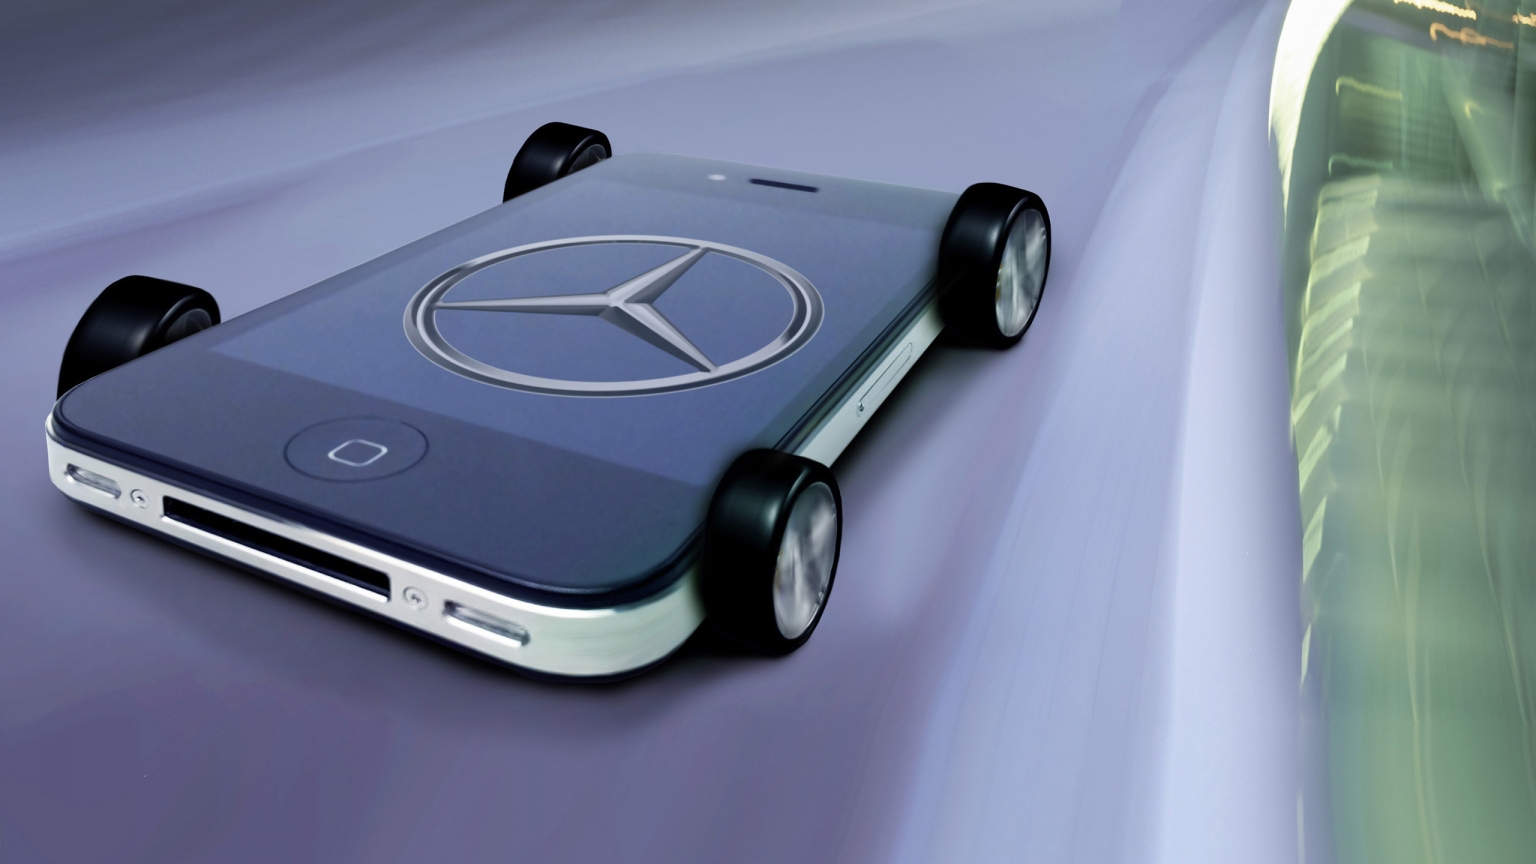 Mercedes Benz iPhone for 1536 x 864 HDTV resolution